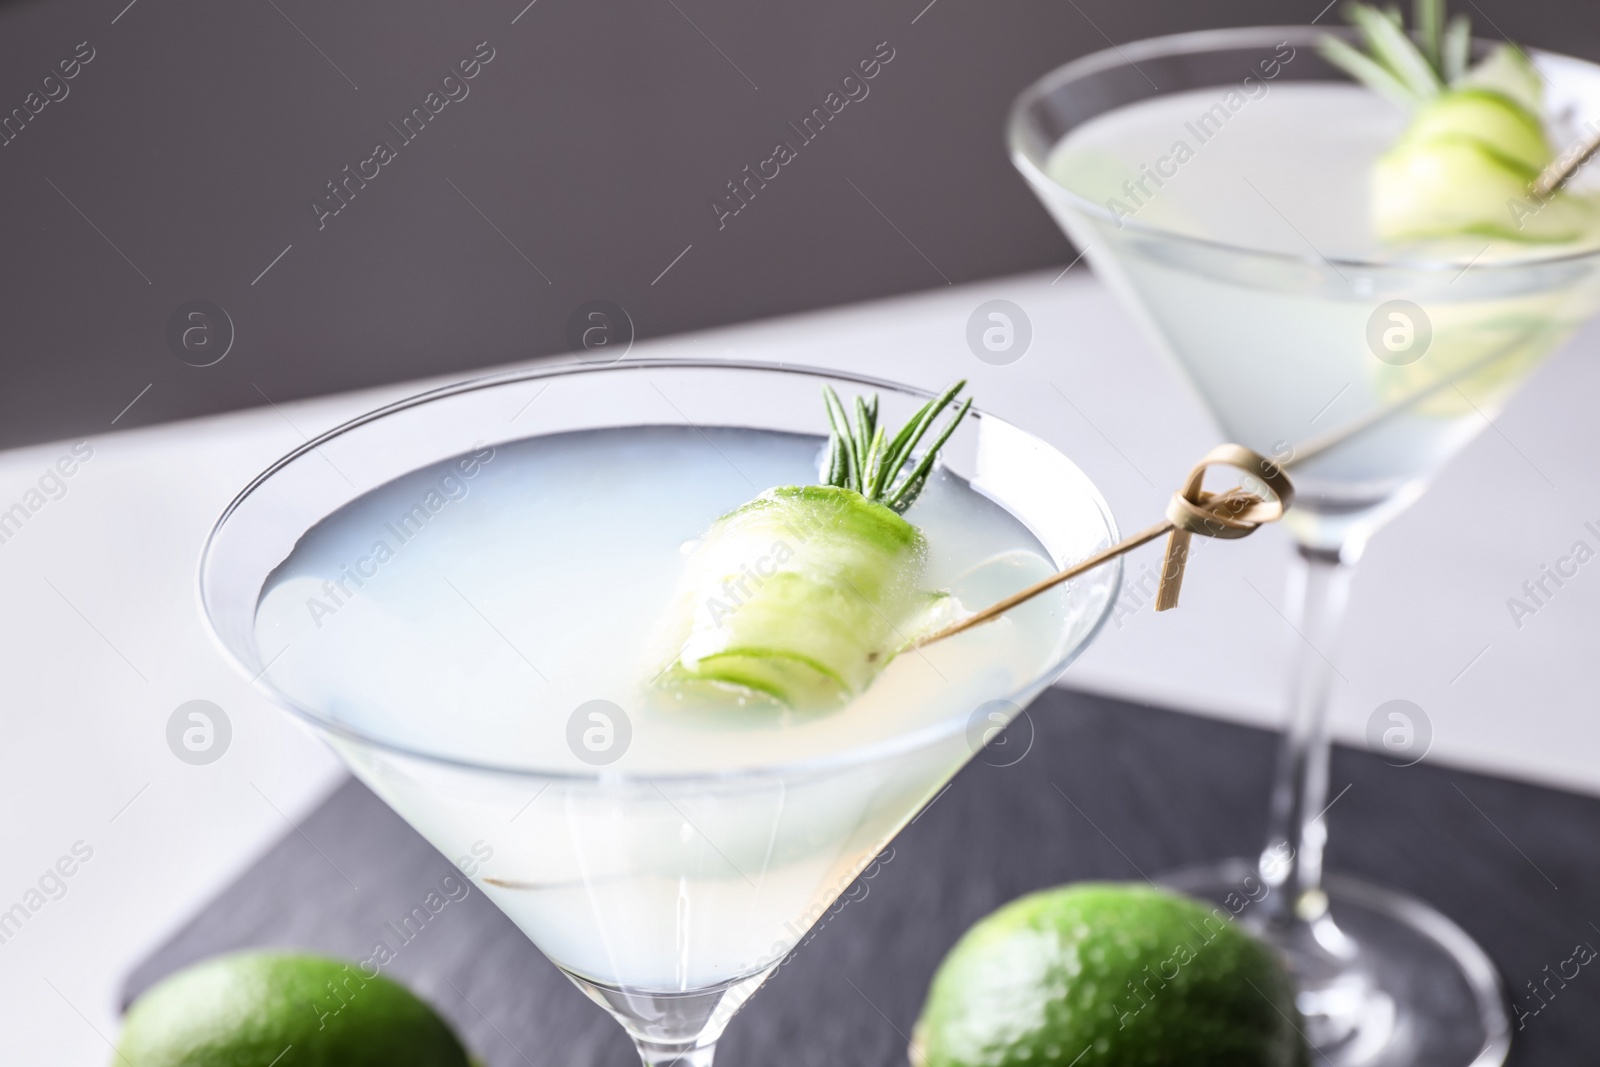 Photo of Glasses of cucumber martini on table against dark background, closeup. Space for text